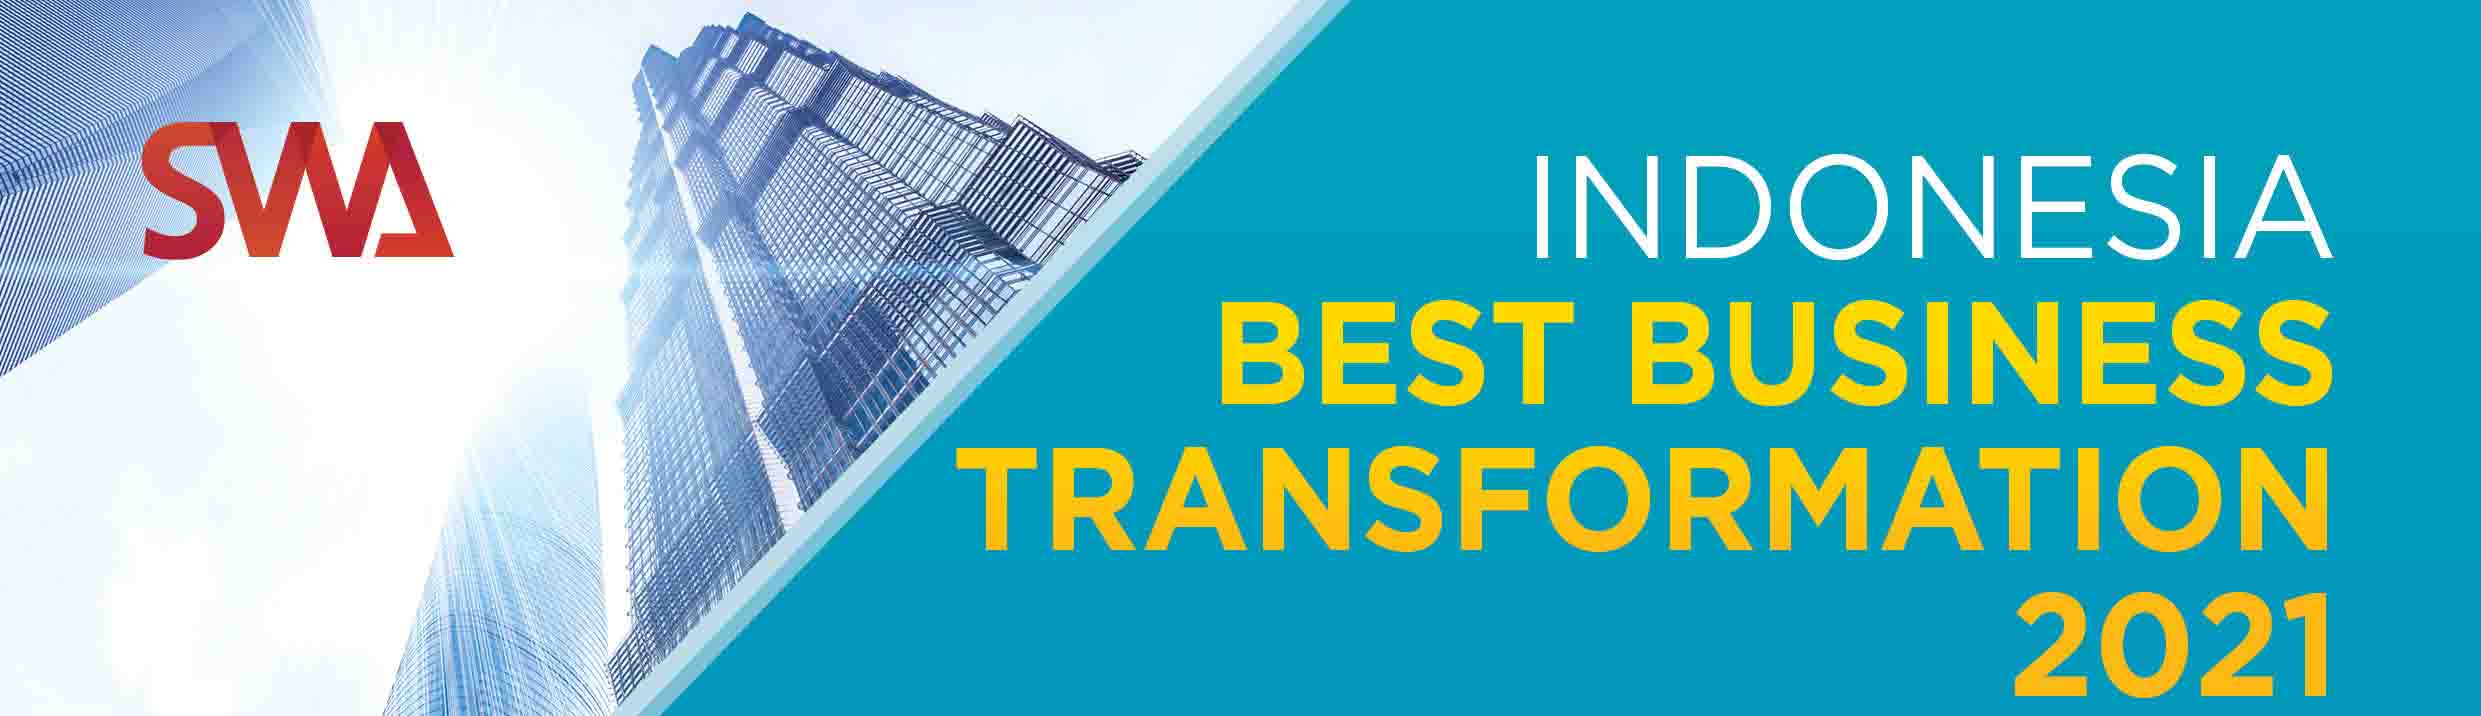 Indonesia Best Business Transformation 2021